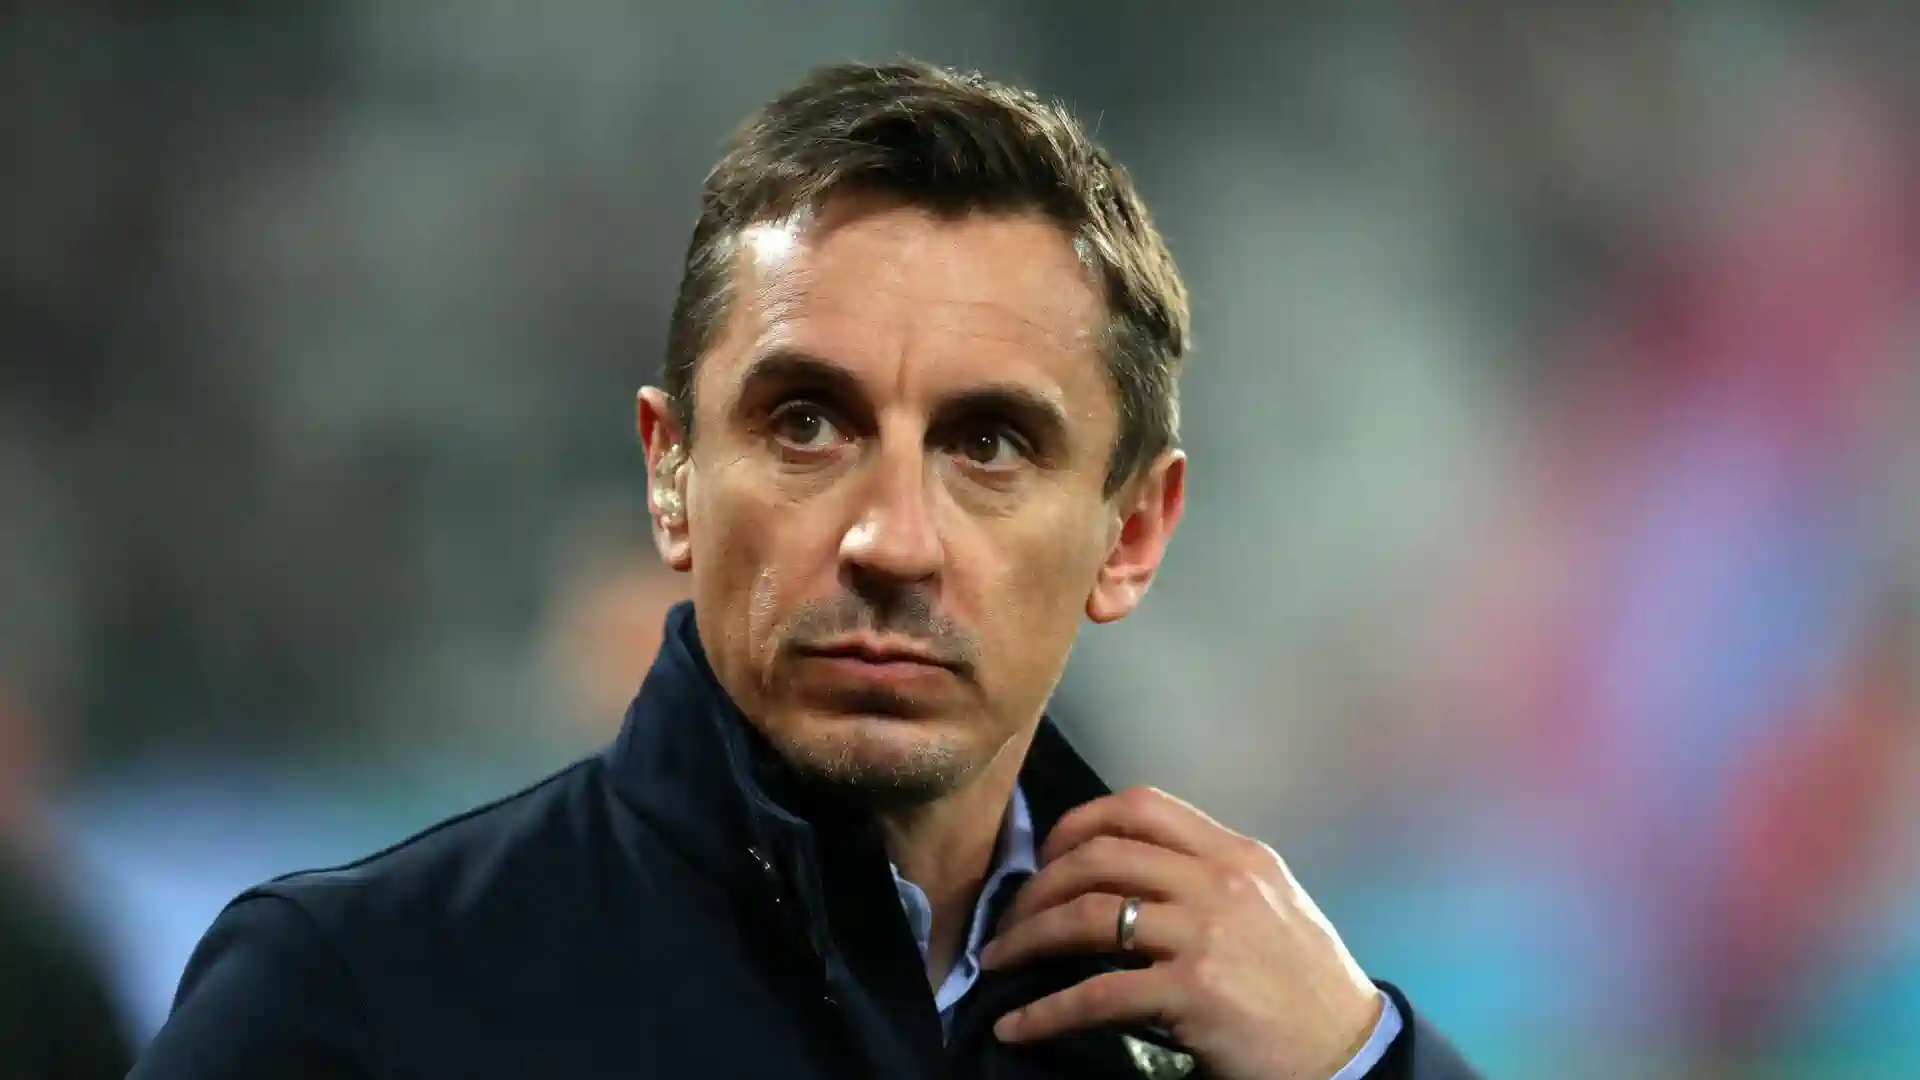 Gary Neville has criticised the Manchester United game